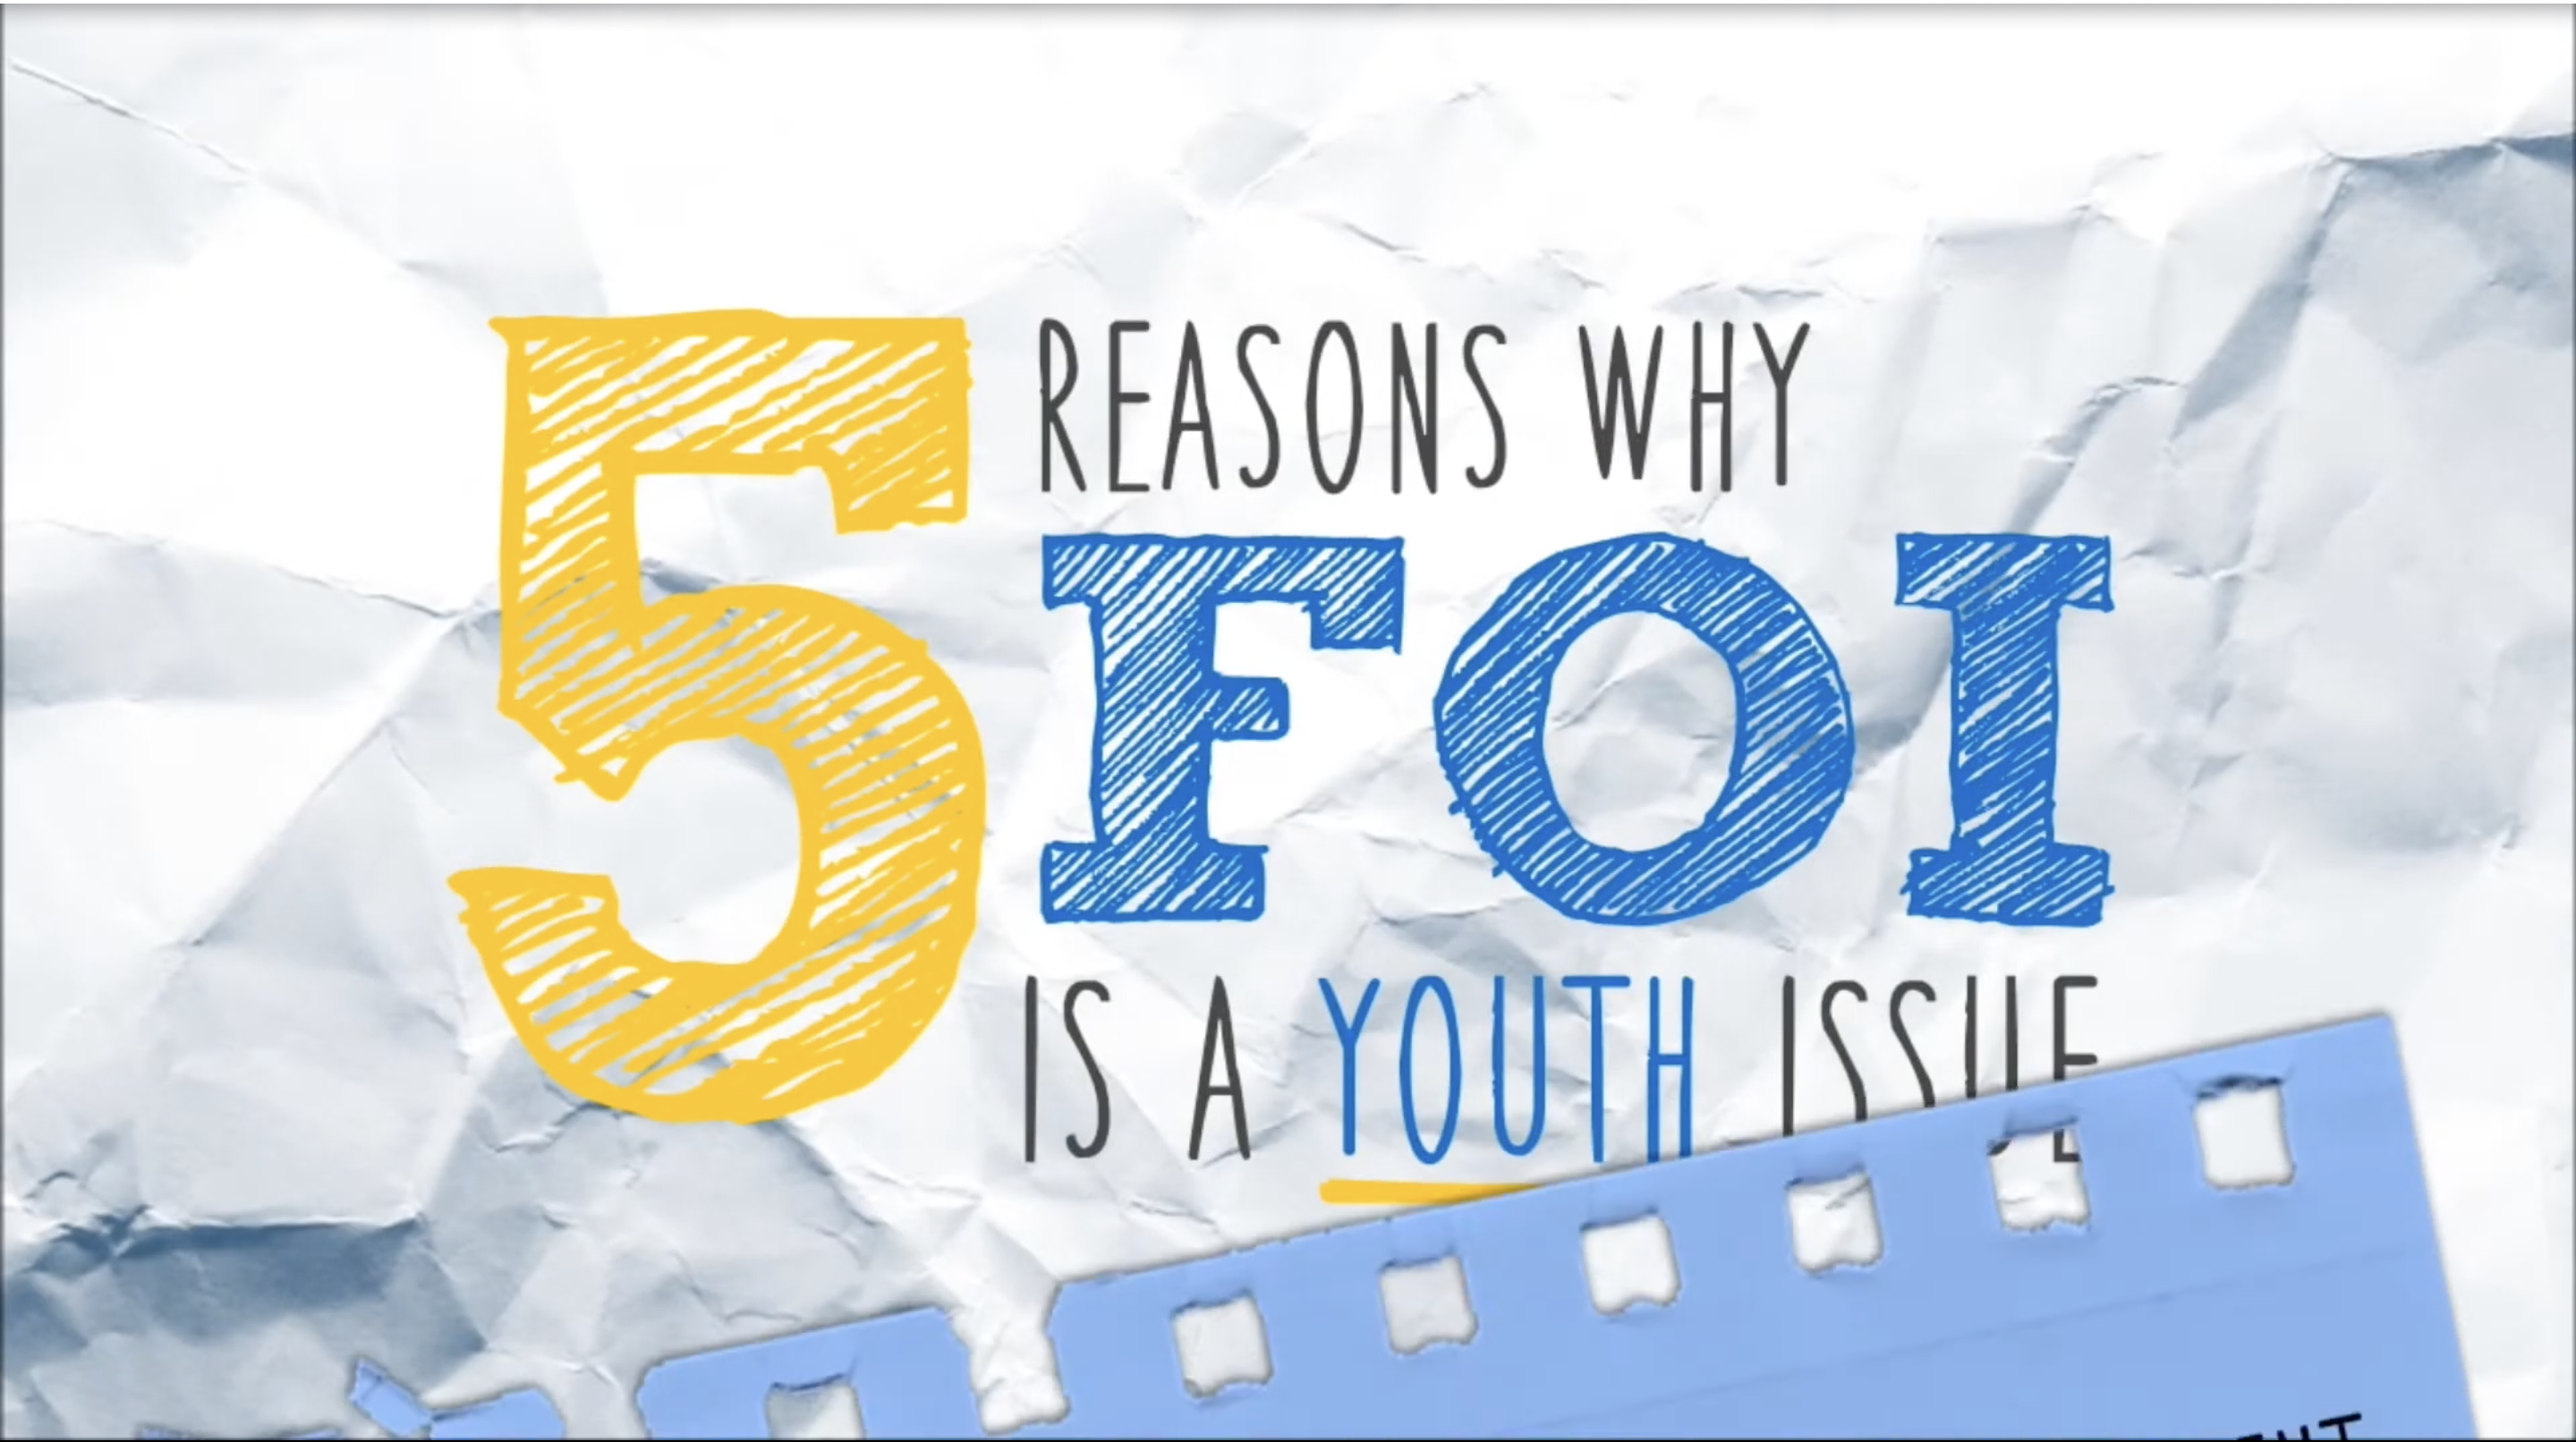 FOI is a youth Issue